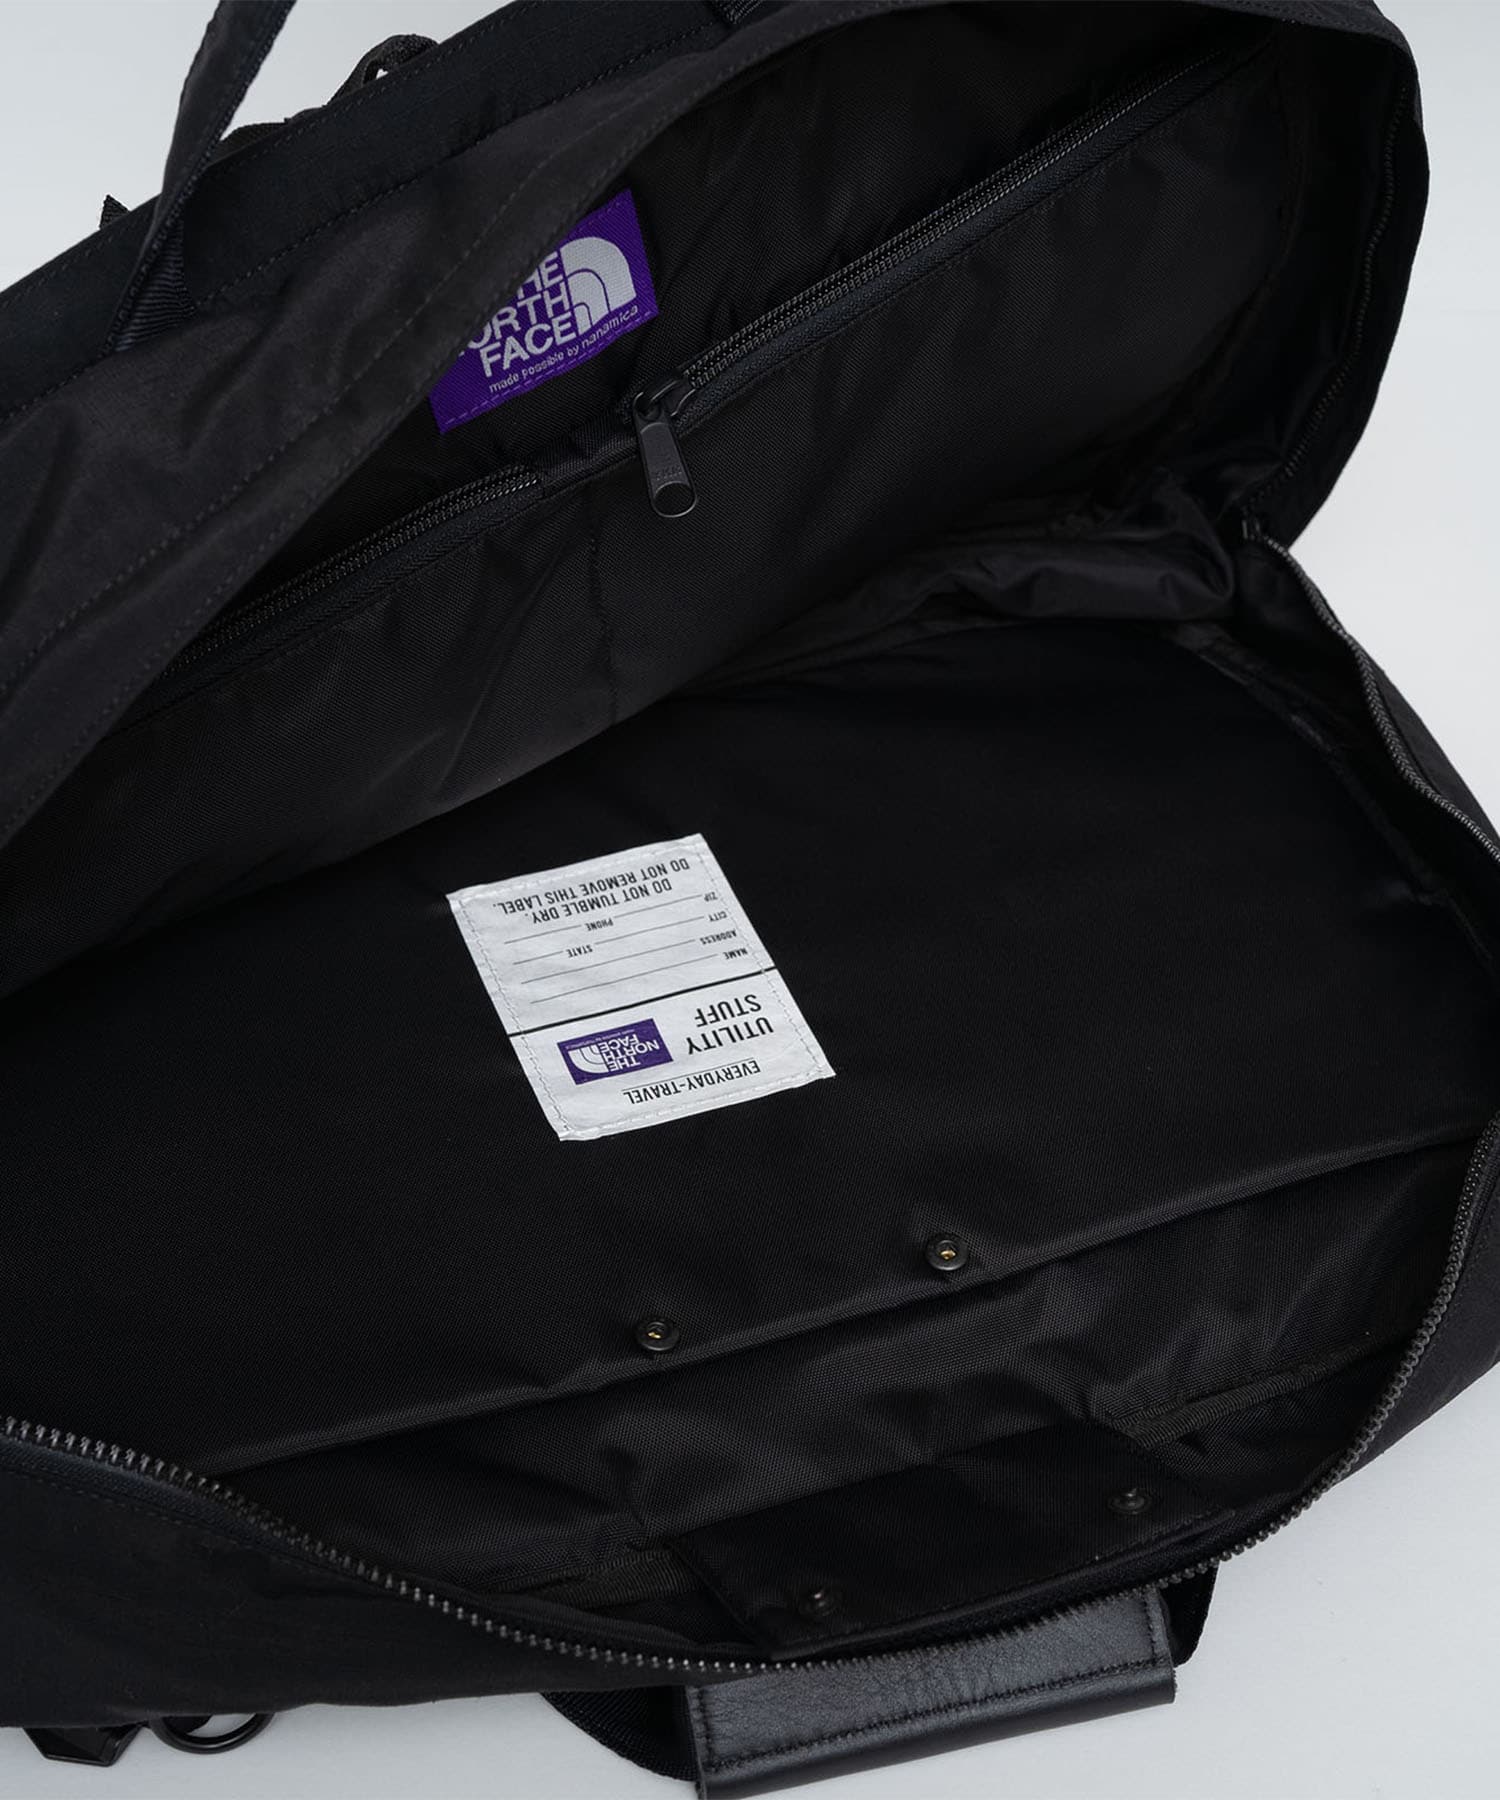 Mountain Wind 3Way Bag THE NORTH FACE PURPLE LABEL